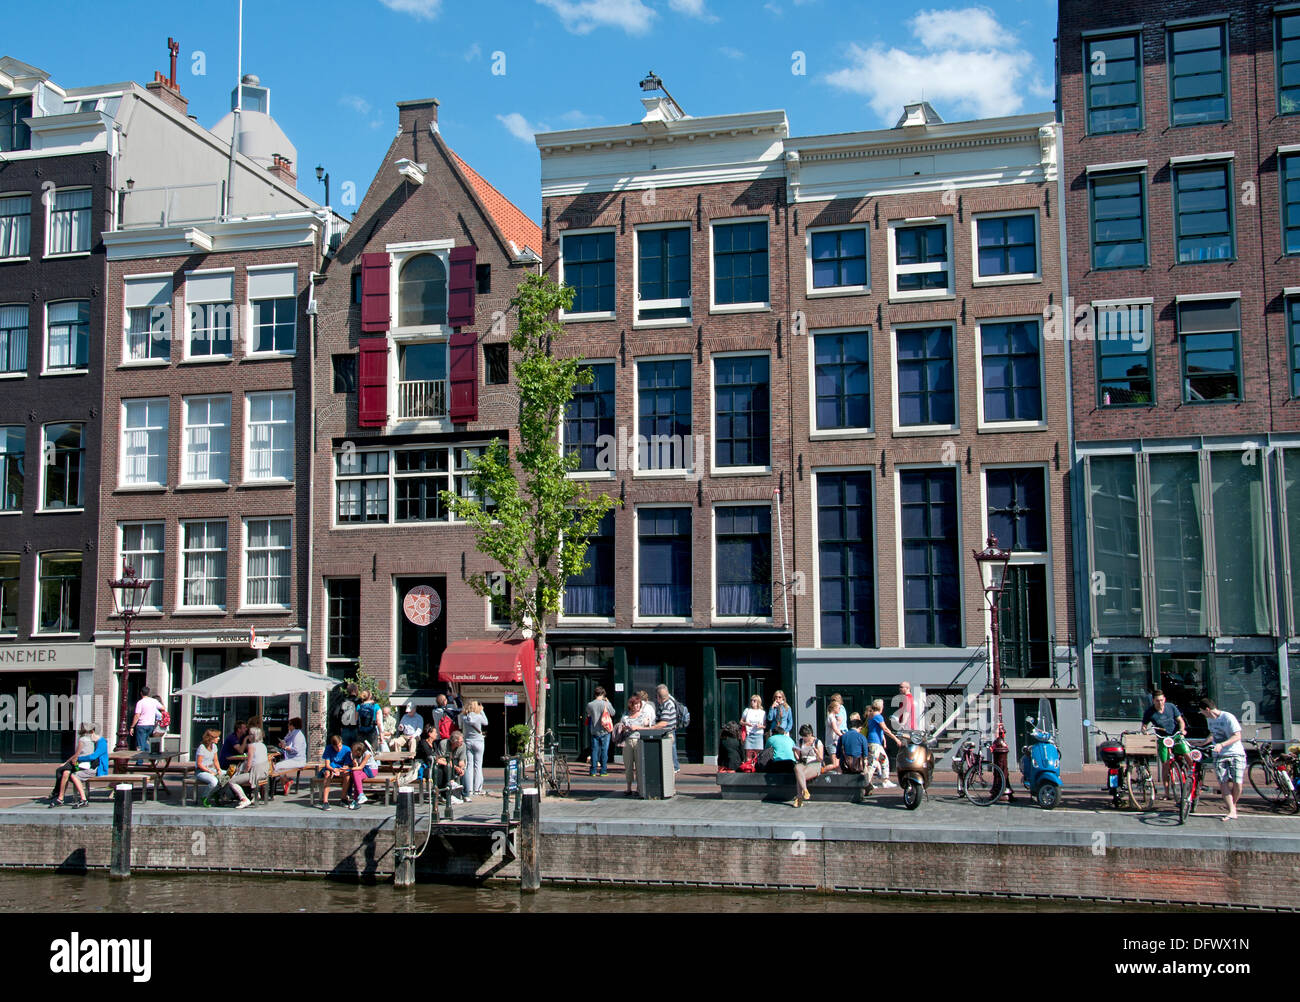 The Anne Frank House Prinsengracht 263265 canal in